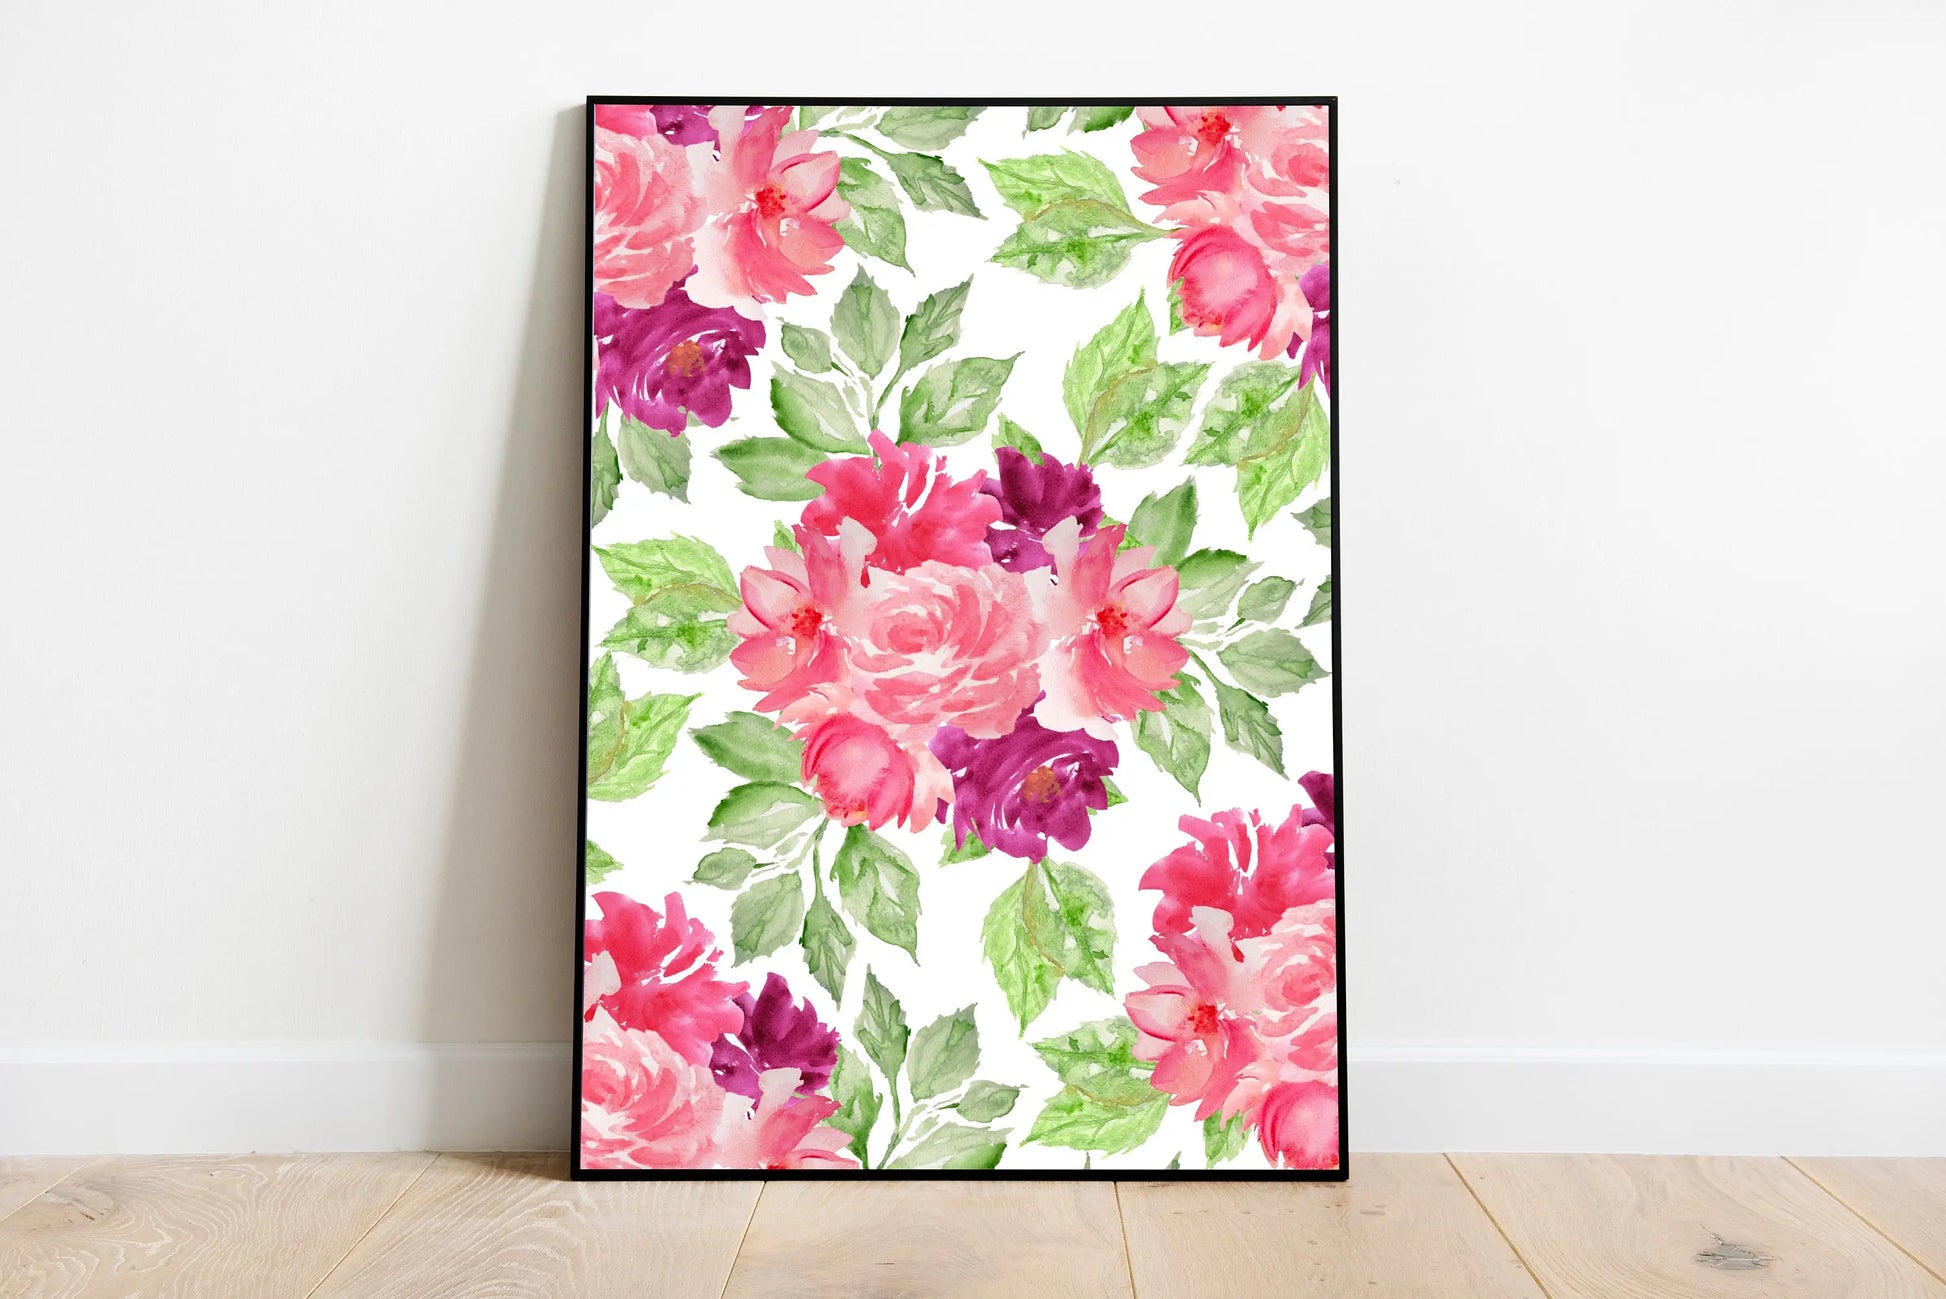 Watercolor Flowers, Floral Art Prints, Floral Wall Art, Bedroom Wall Decor, Valentines Day Gift, Gift for Her The Wedding Crest Lab